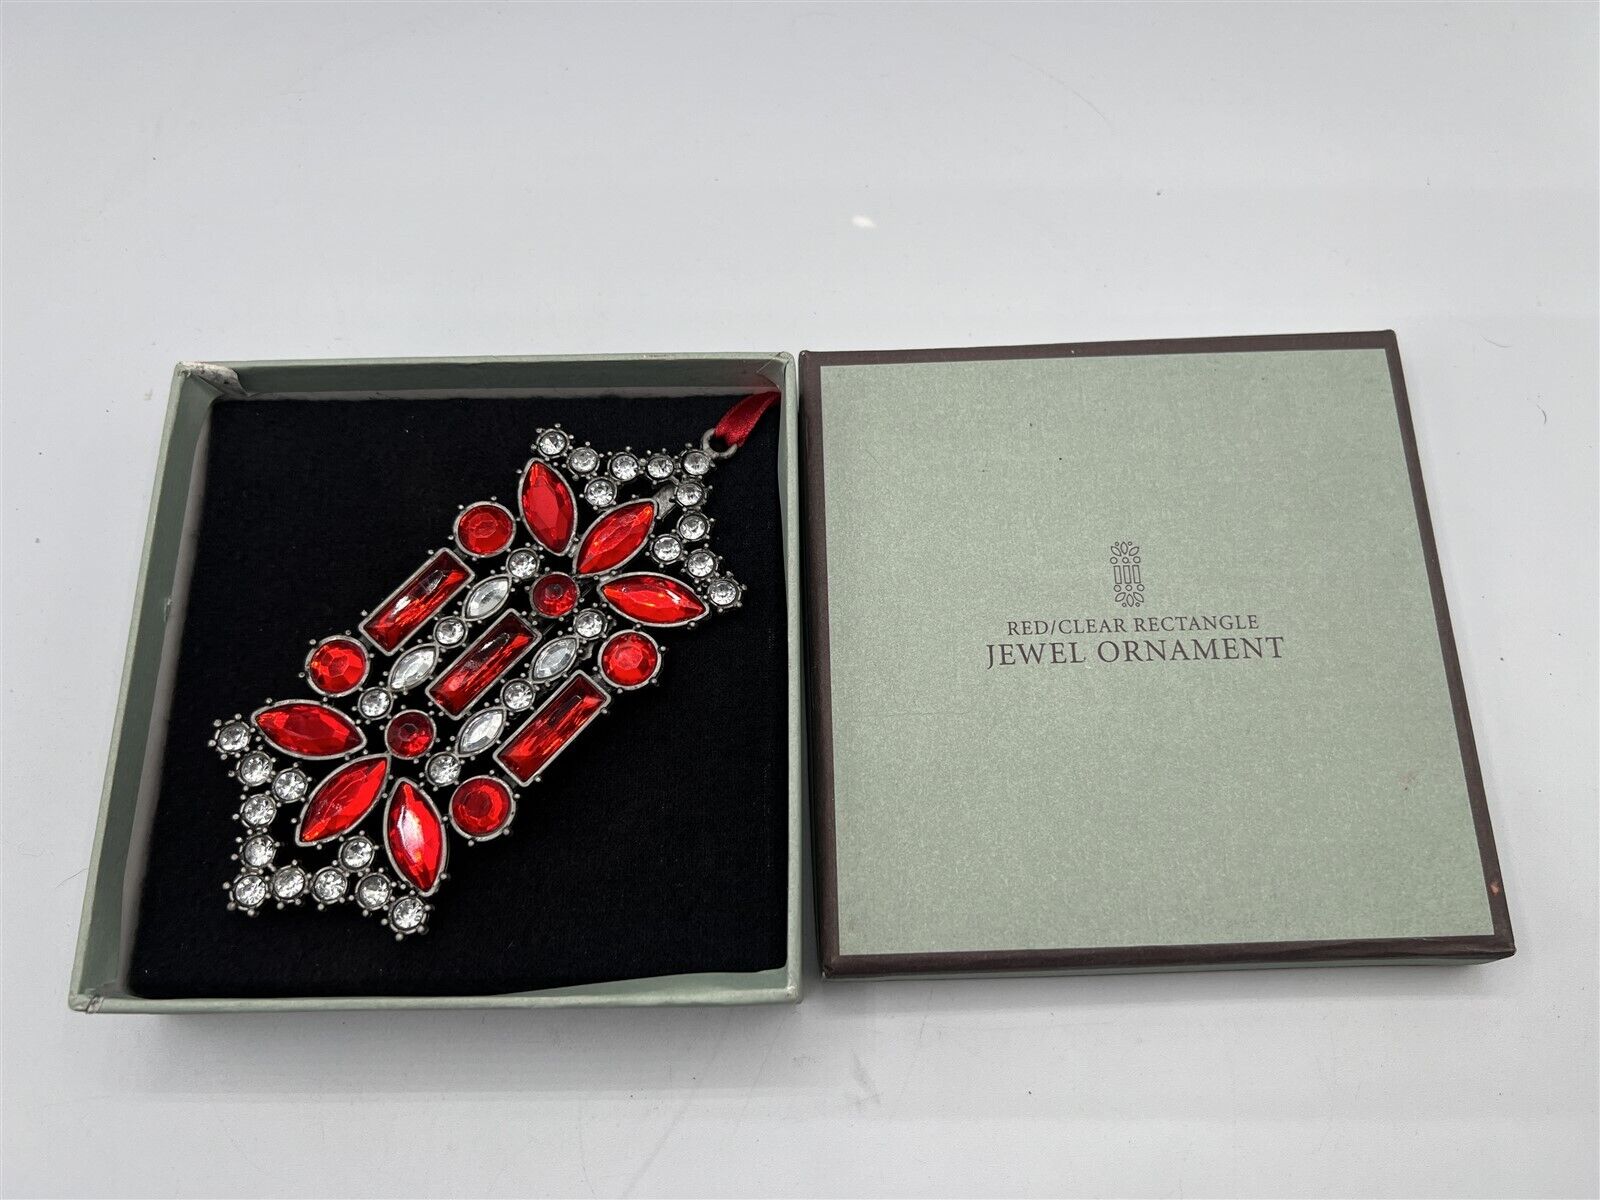 RESTORATION HARDWARE RED / CLEAR RECTANGLE JEWEL ORNAMENT NEW IN BOX